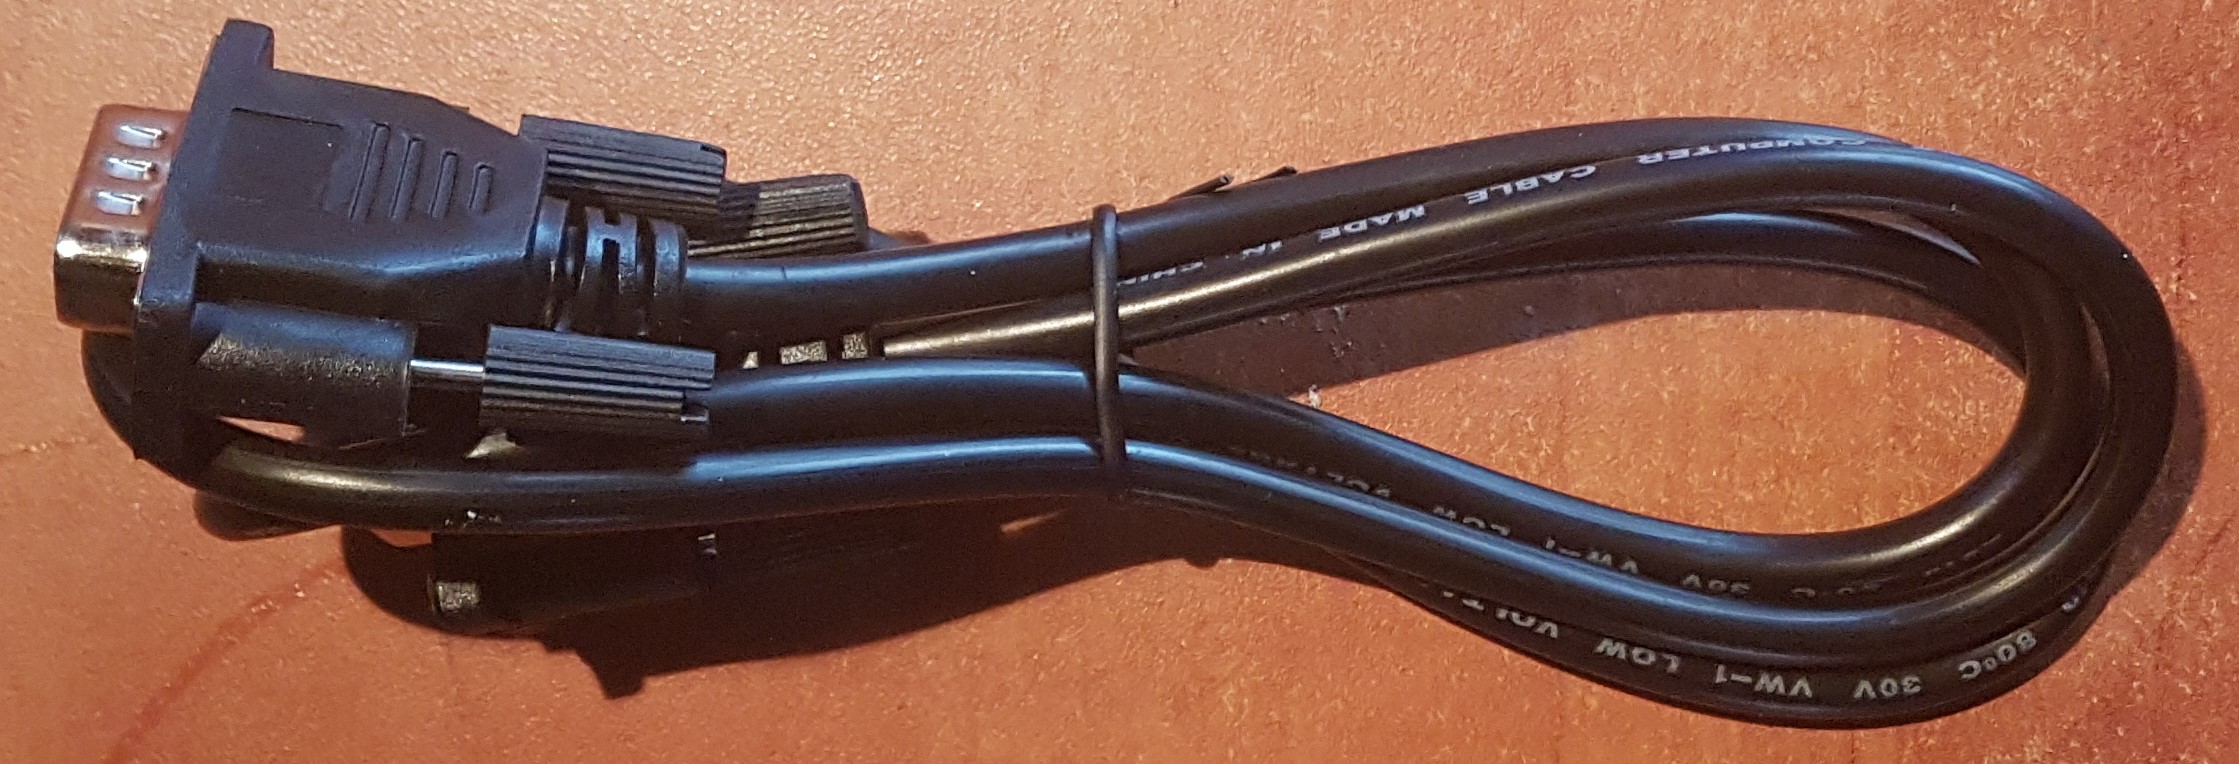 cable2.jpg